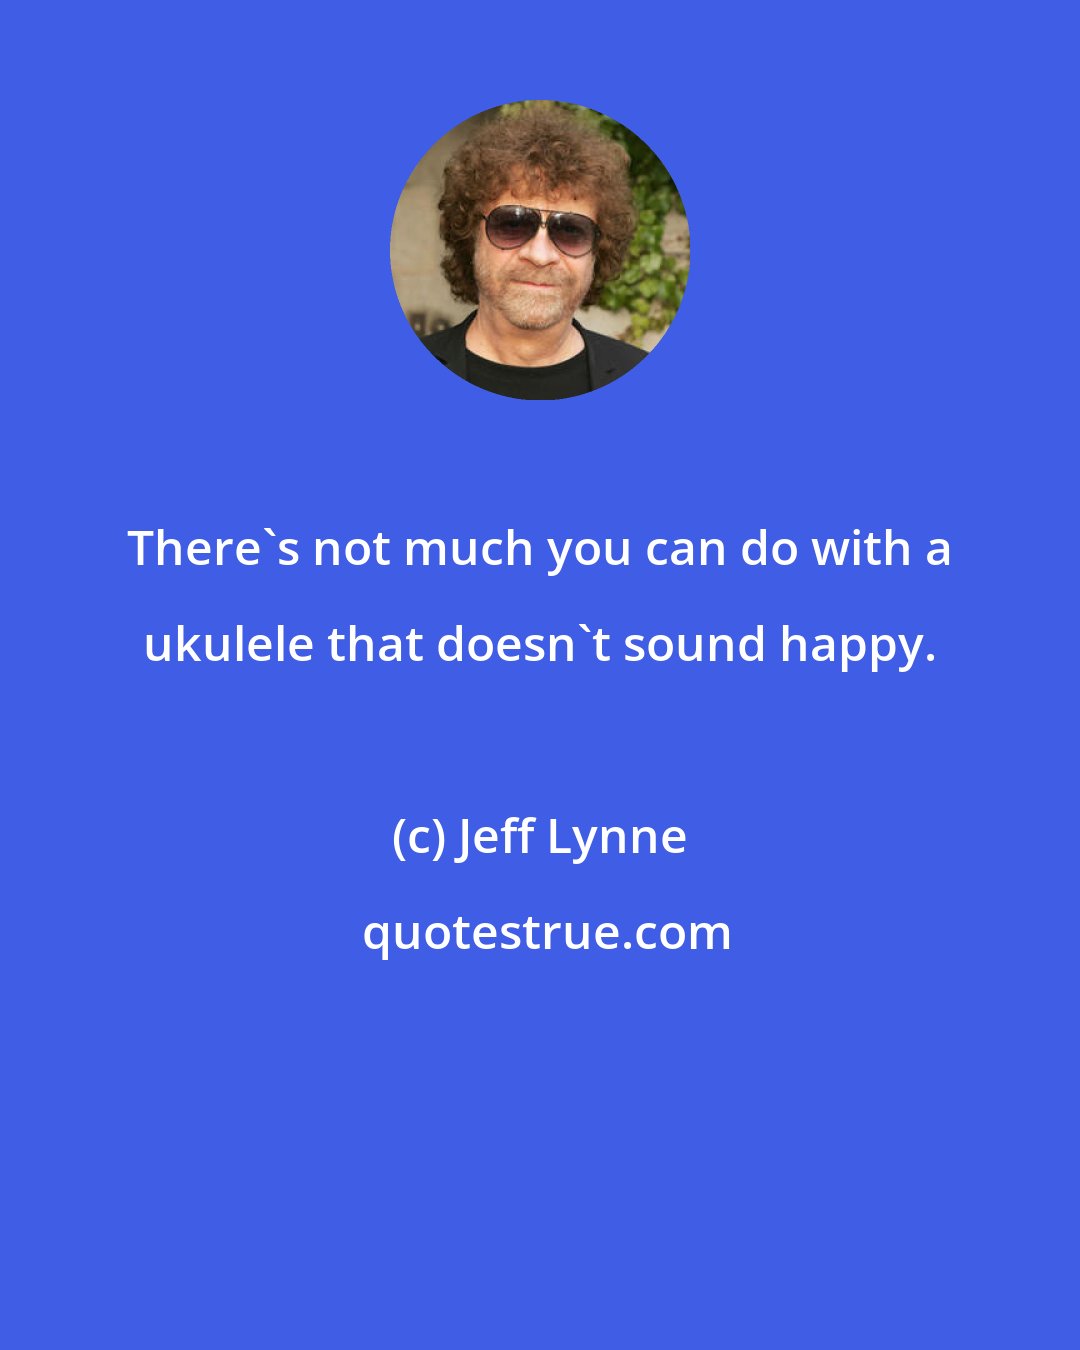 Jeff Lynne: There's not much you can do with a ukulele that doesn't sound happy.